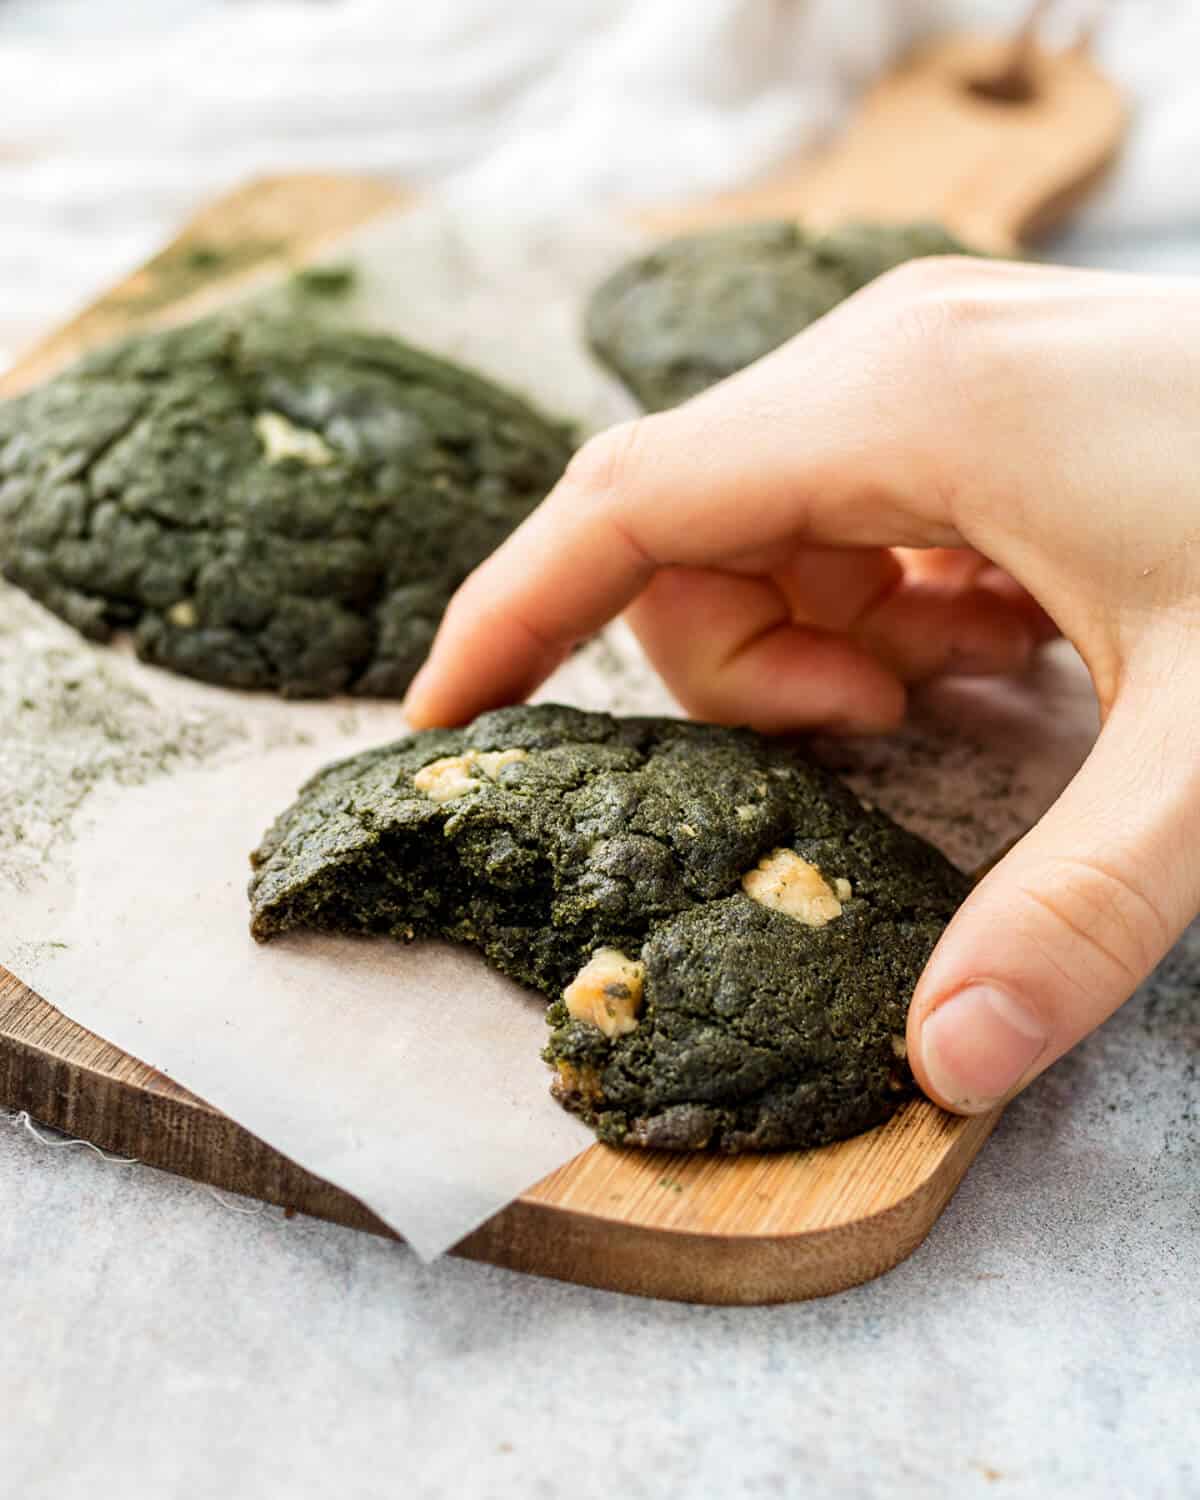 Three Spirulina Cookies on a wooden chopping board. A bite has been taken from the front cookie and there is a hand holding it.